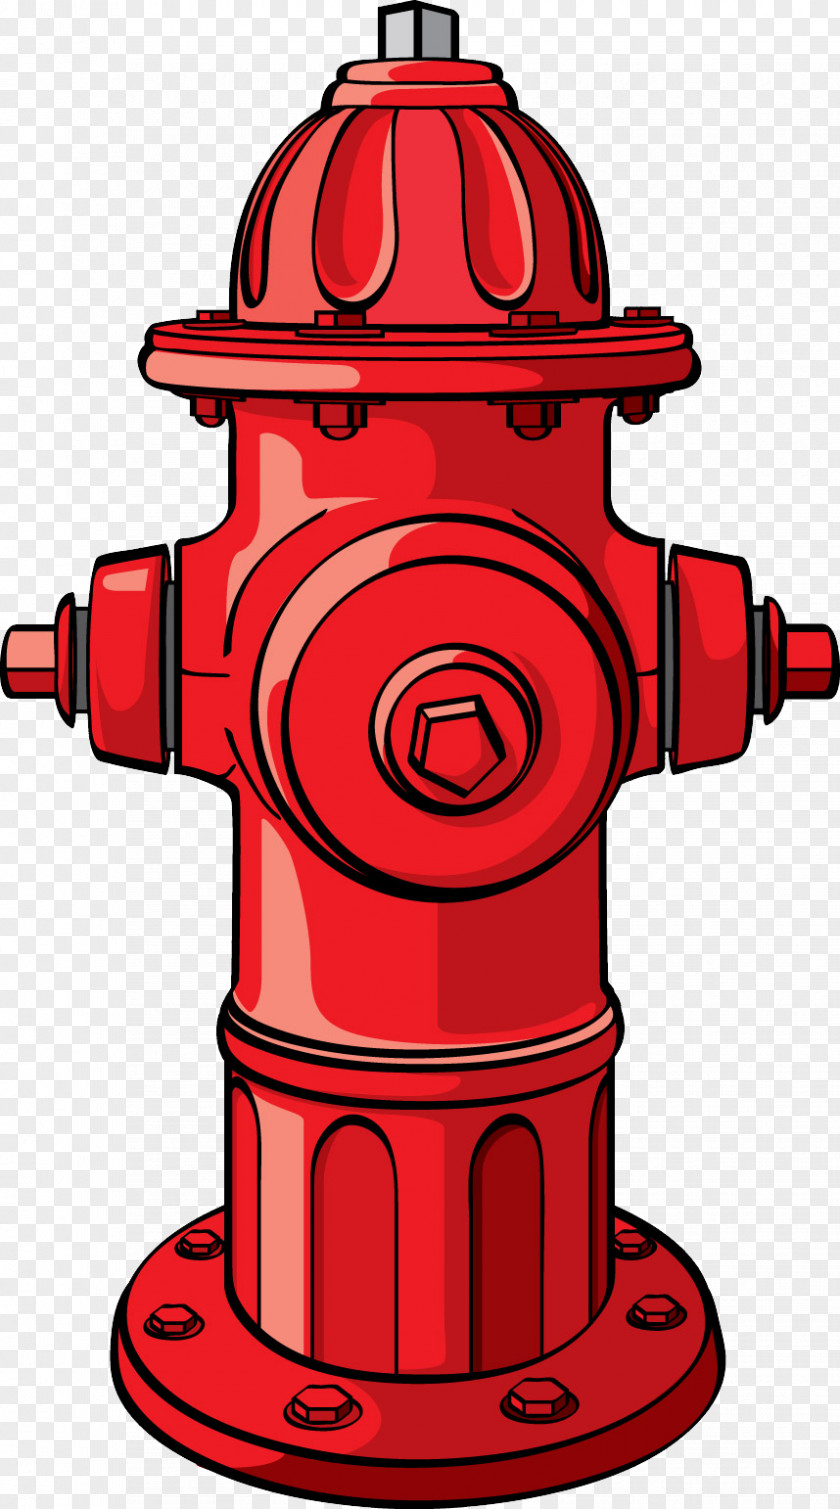 Fire Hydrant PNG Cartoon Firefighter's Helmet PNG